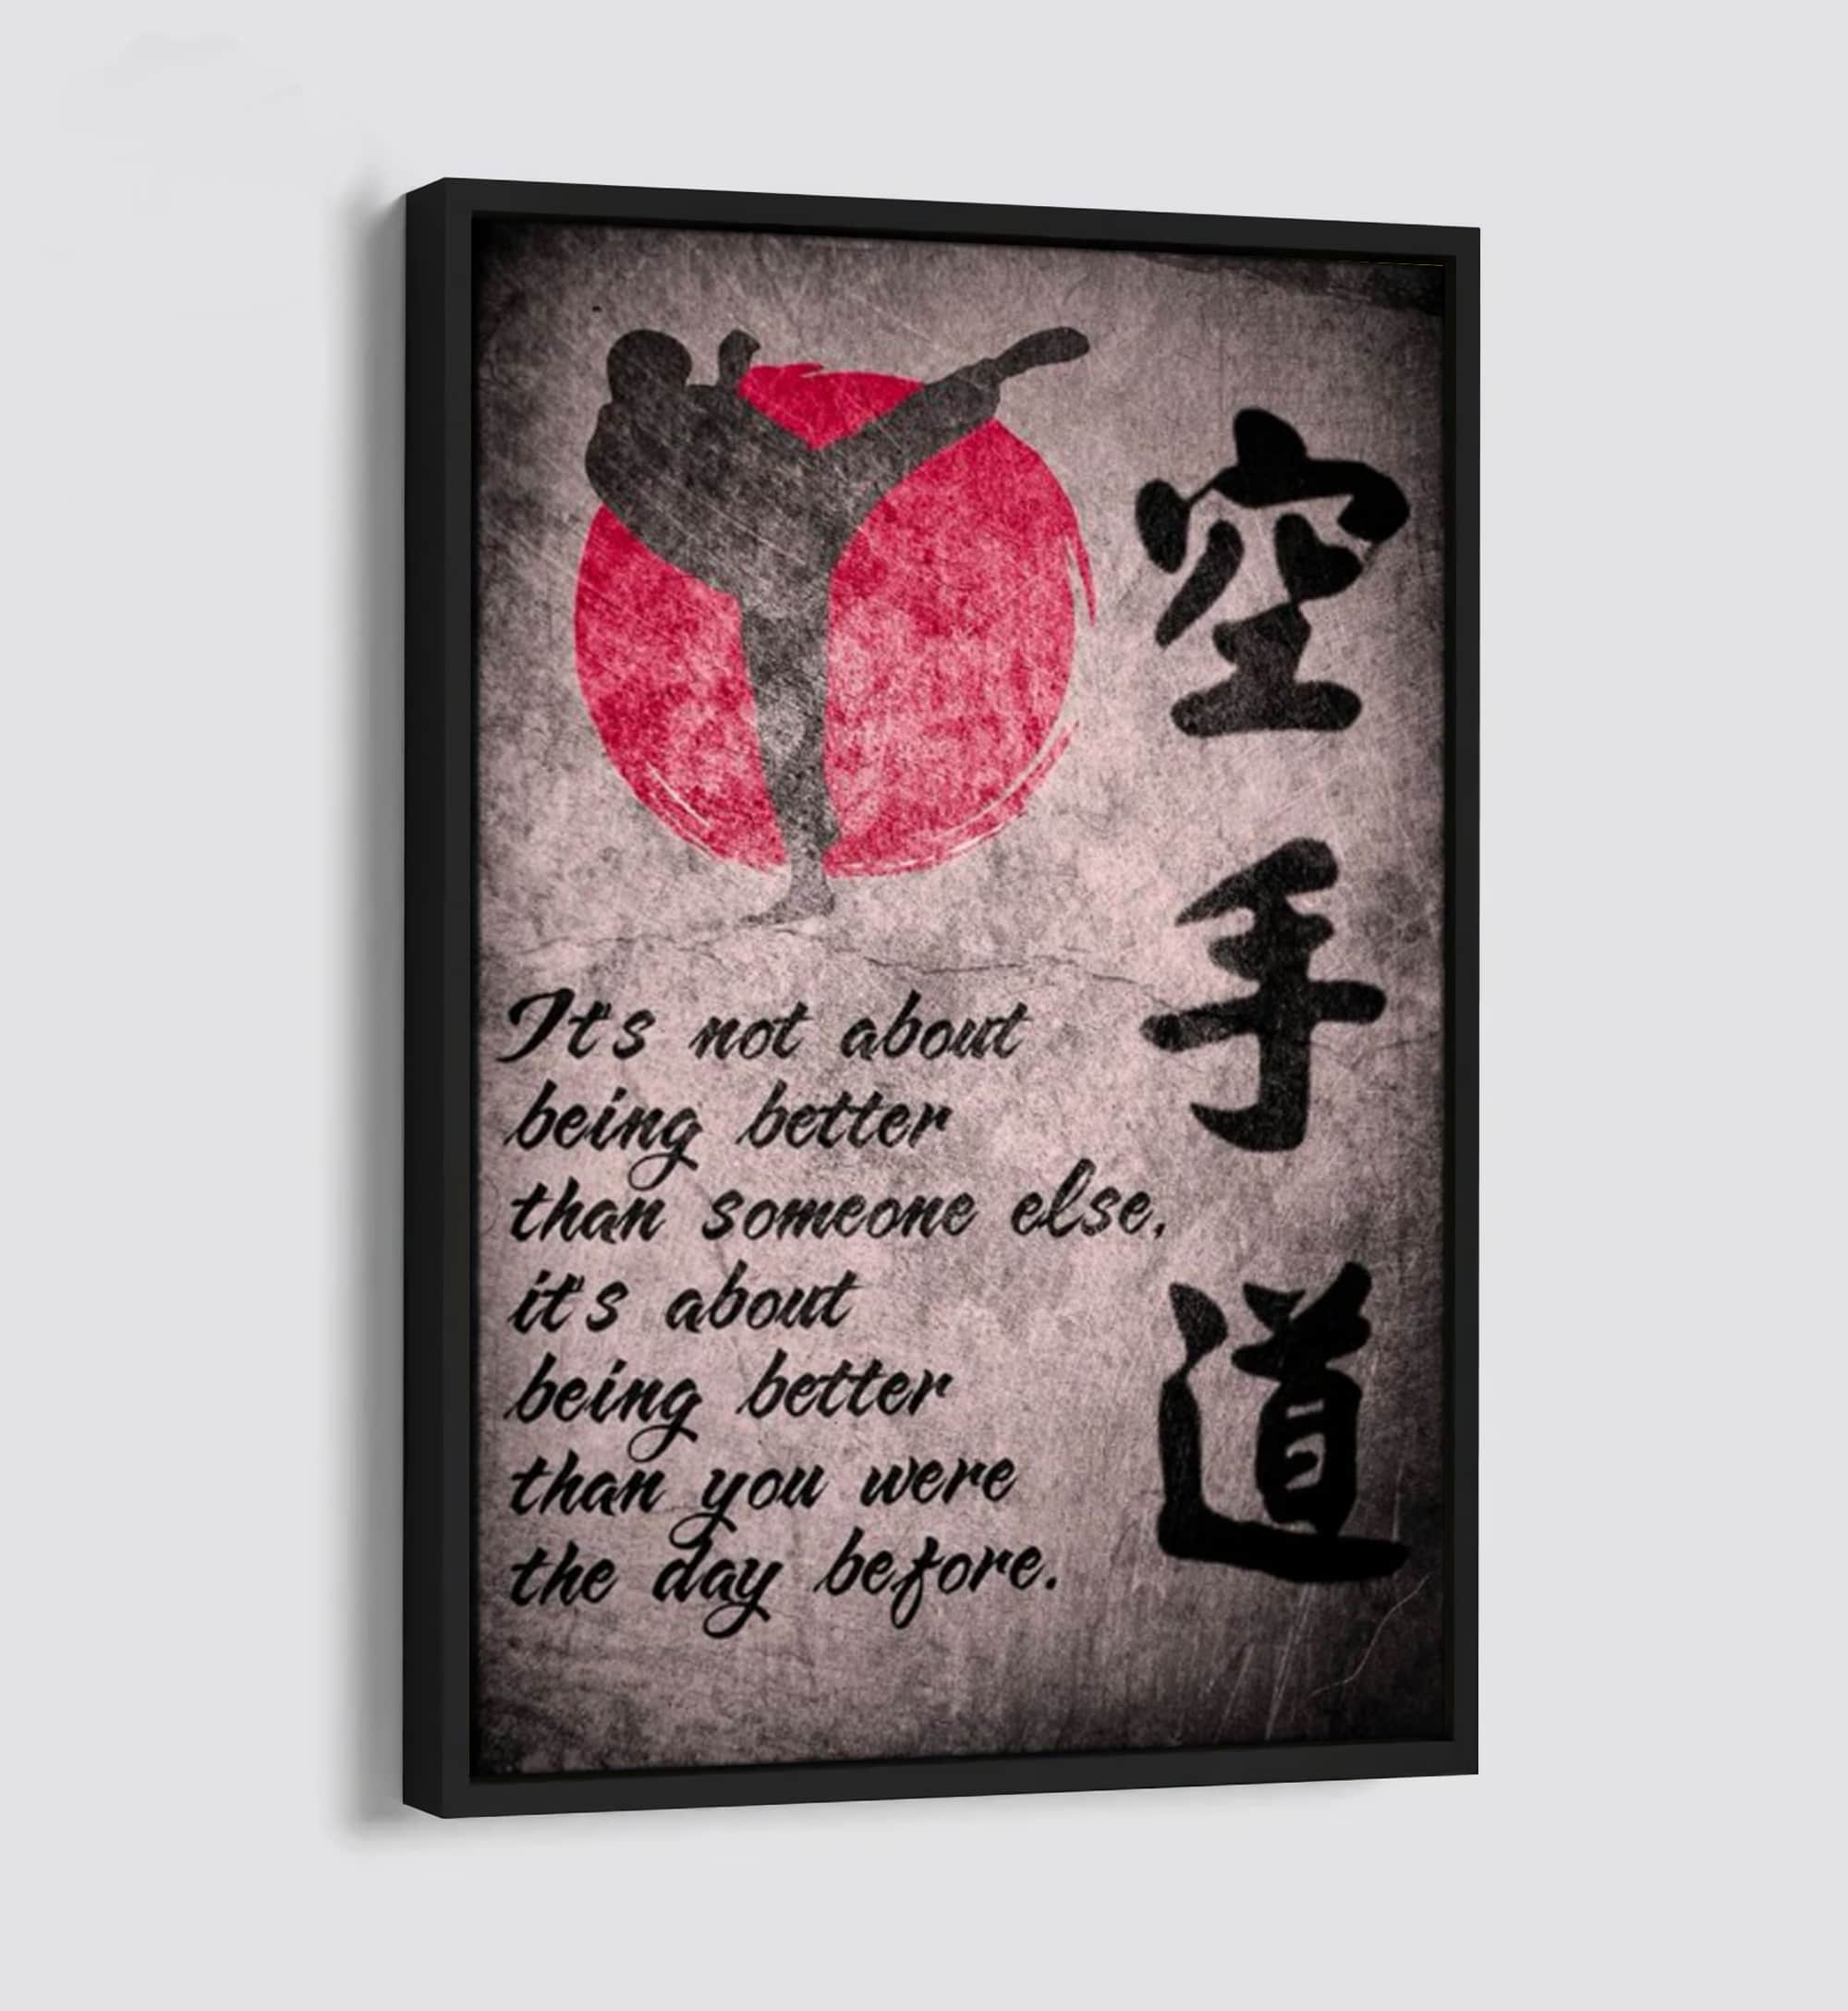 Karate Poster Canvas It Is Not ABout Being Better Than Someone Else It Is About Being Better Than You Were The Day Before